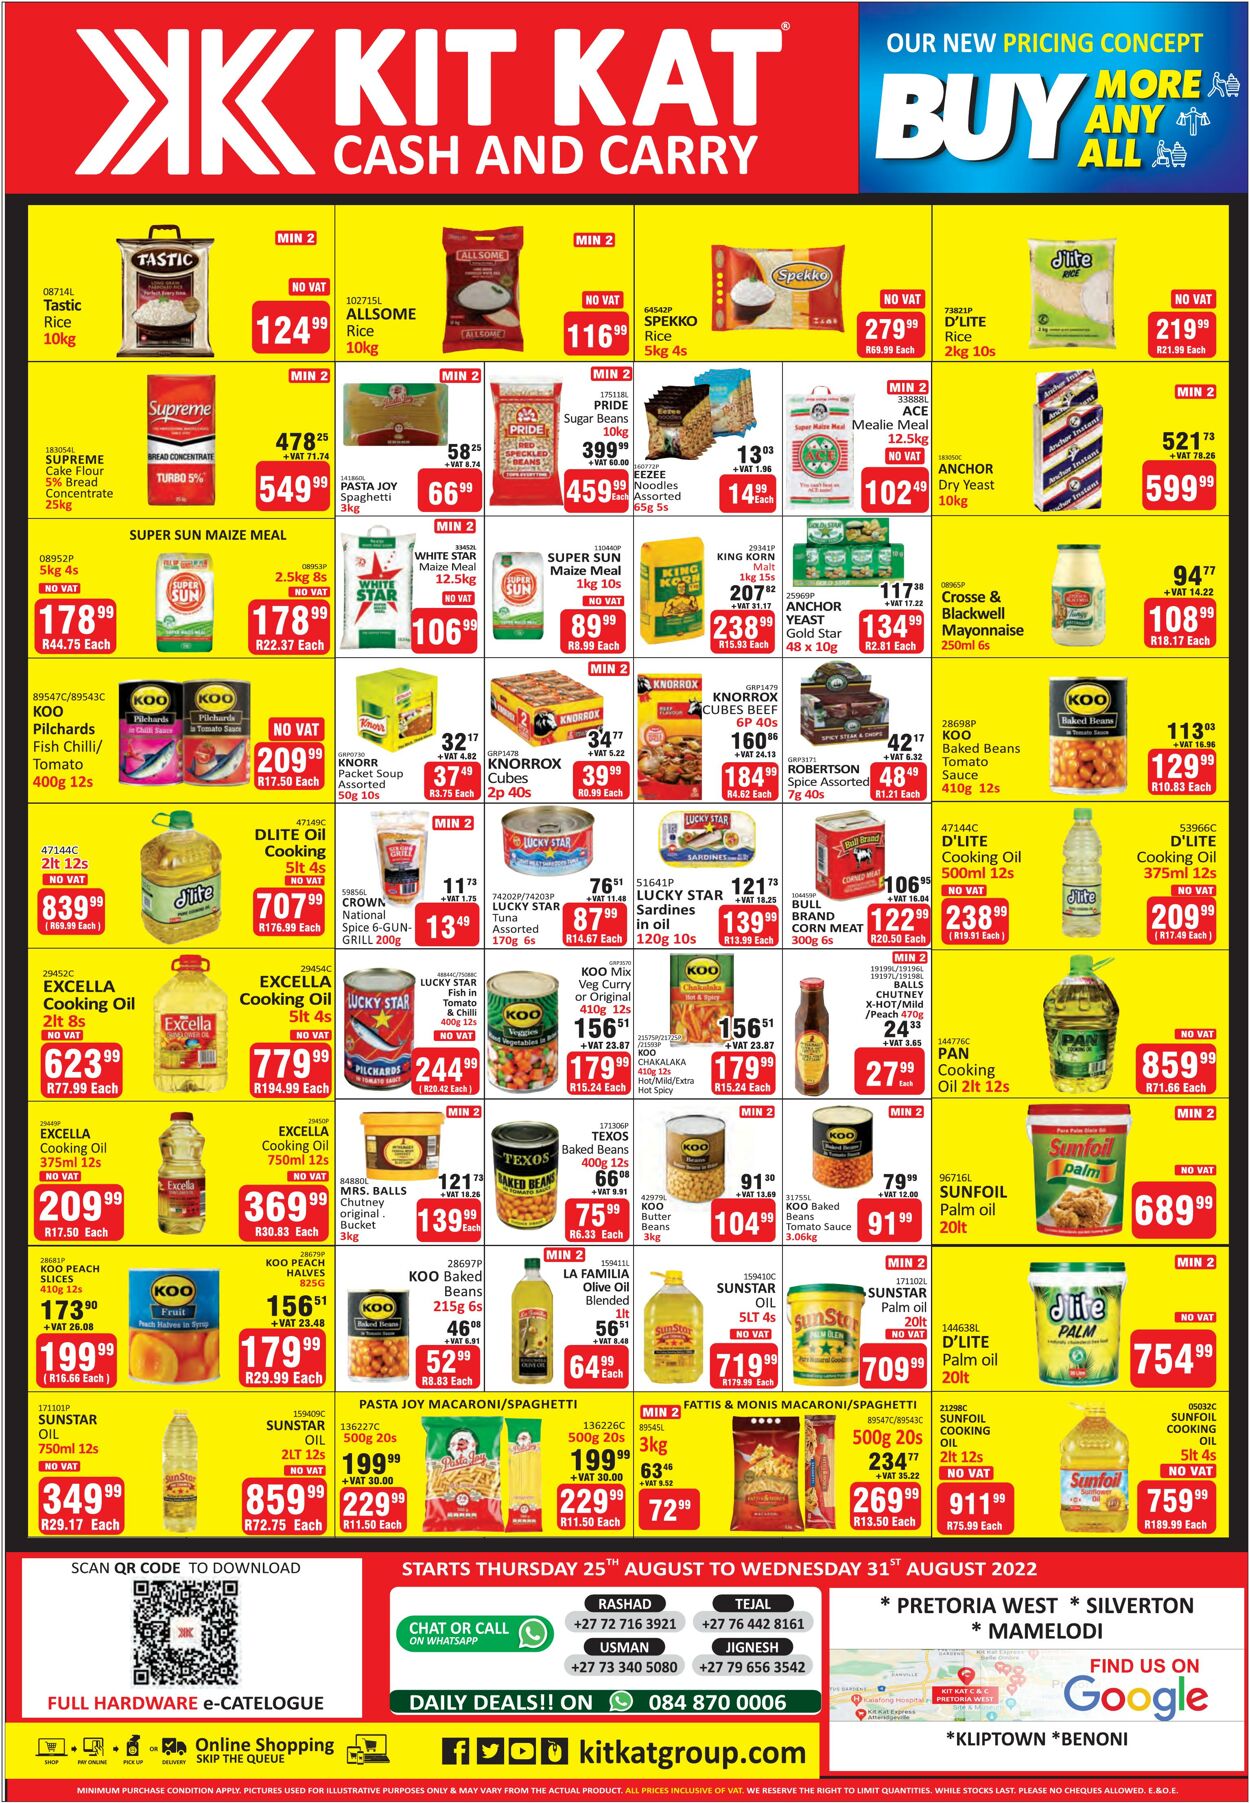 Special Kit Kat Cash and Carry 25.08.2022 - 31.08.2022